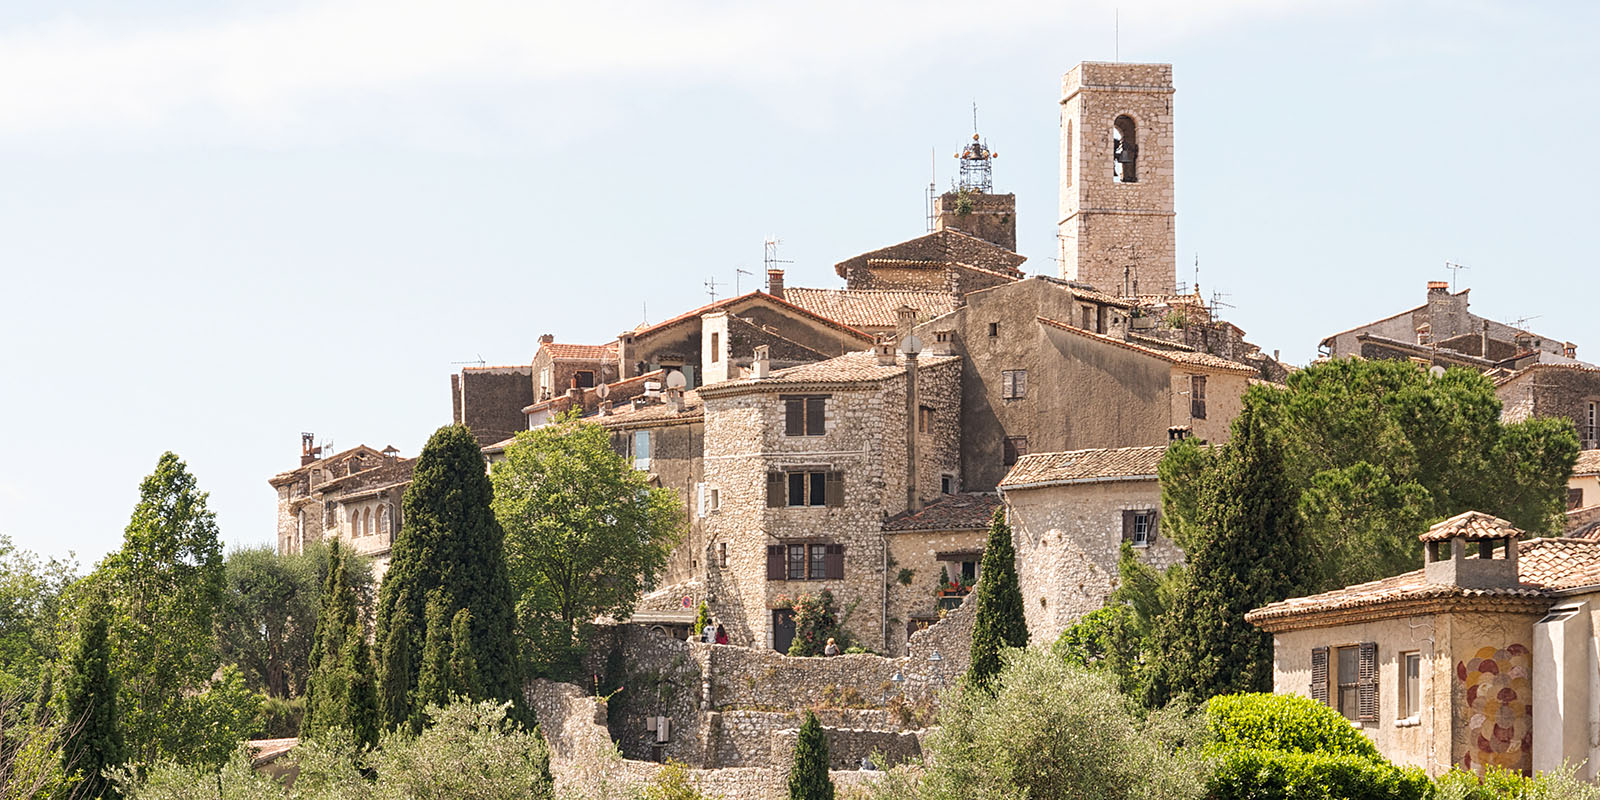 View of Saint-Paul de Vence from the parking at the village entrance